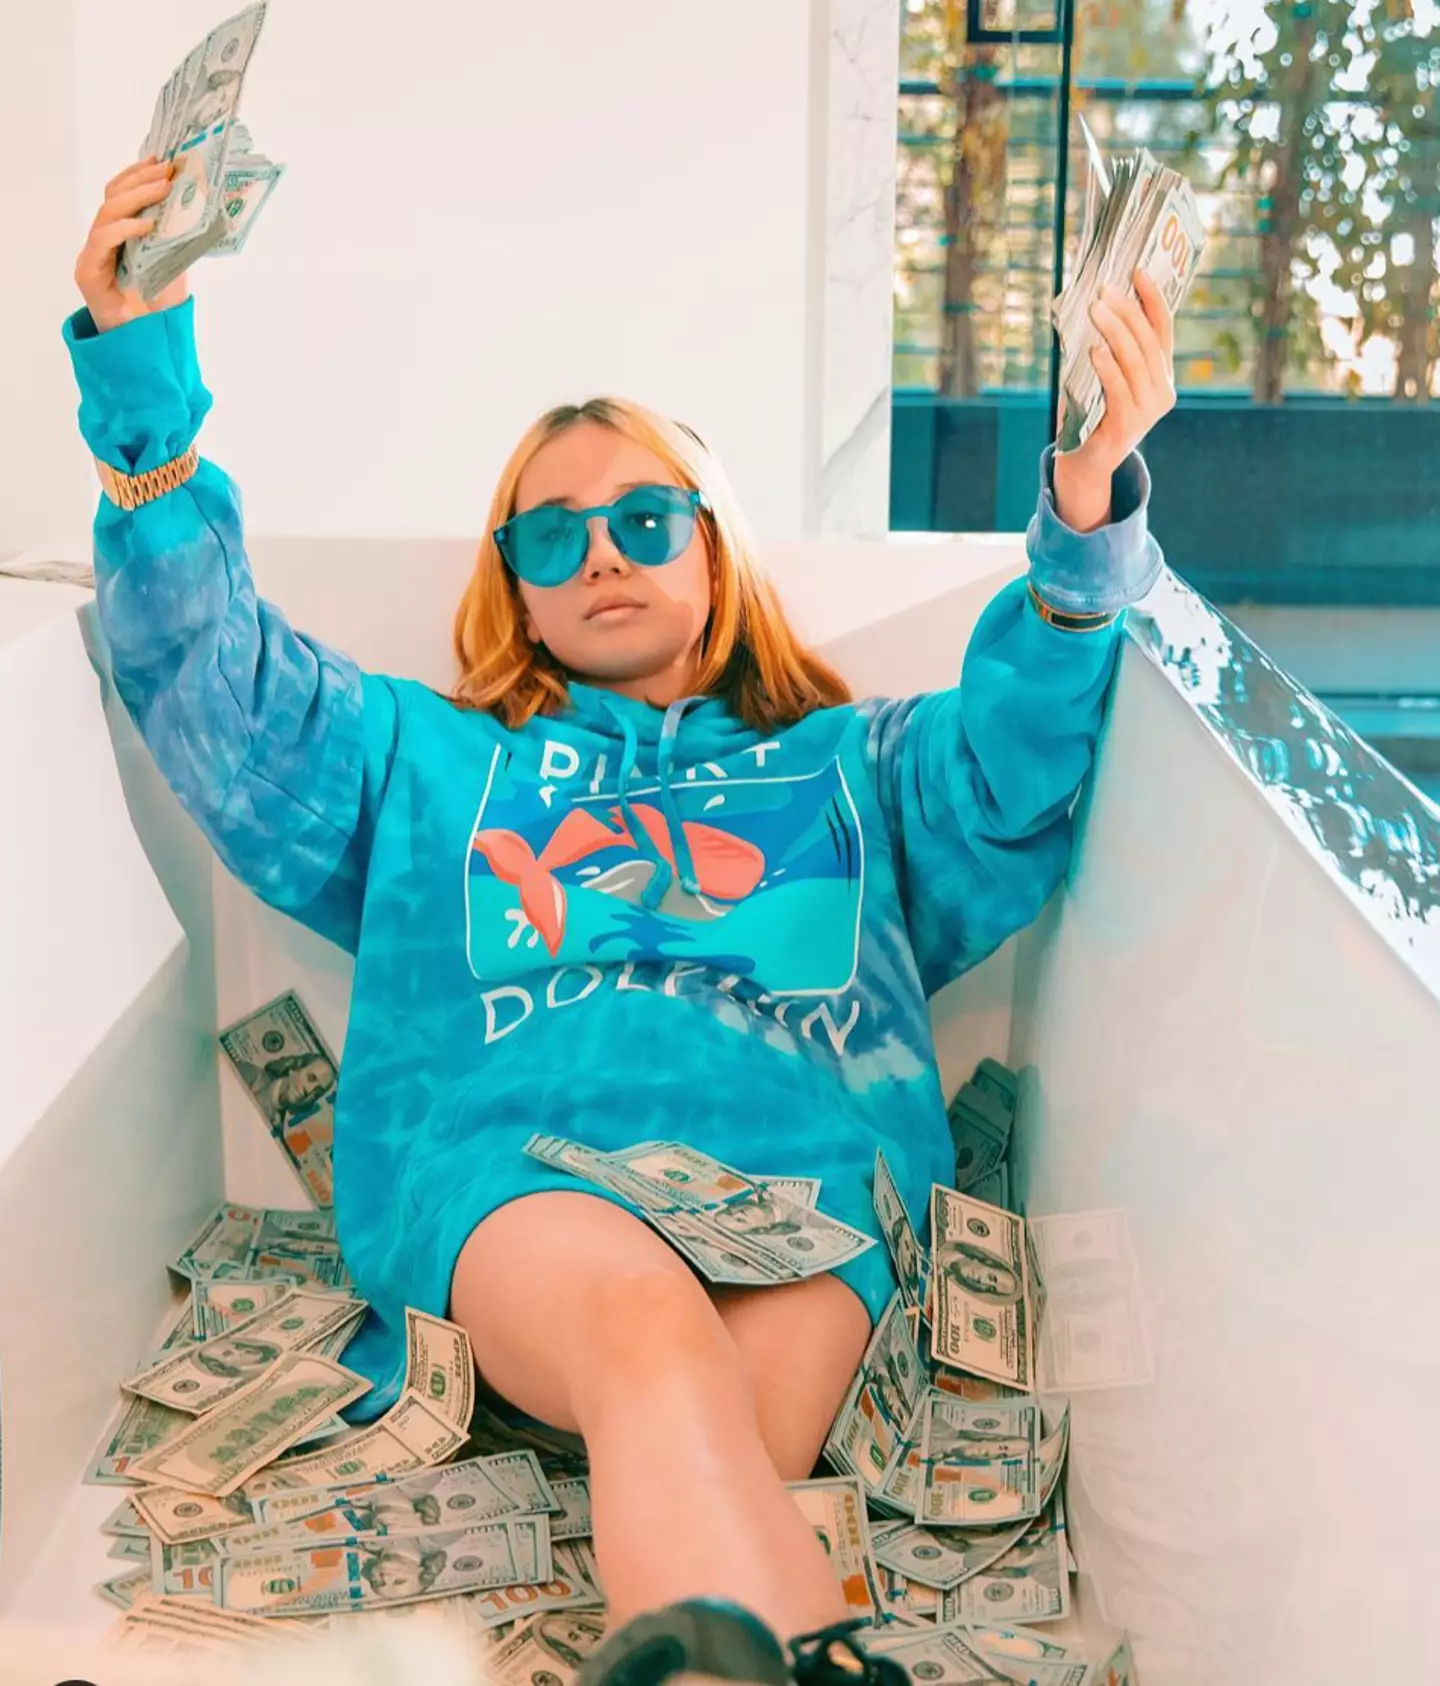 Lil Tay alleged her dad wanted to 'sabotage' her.